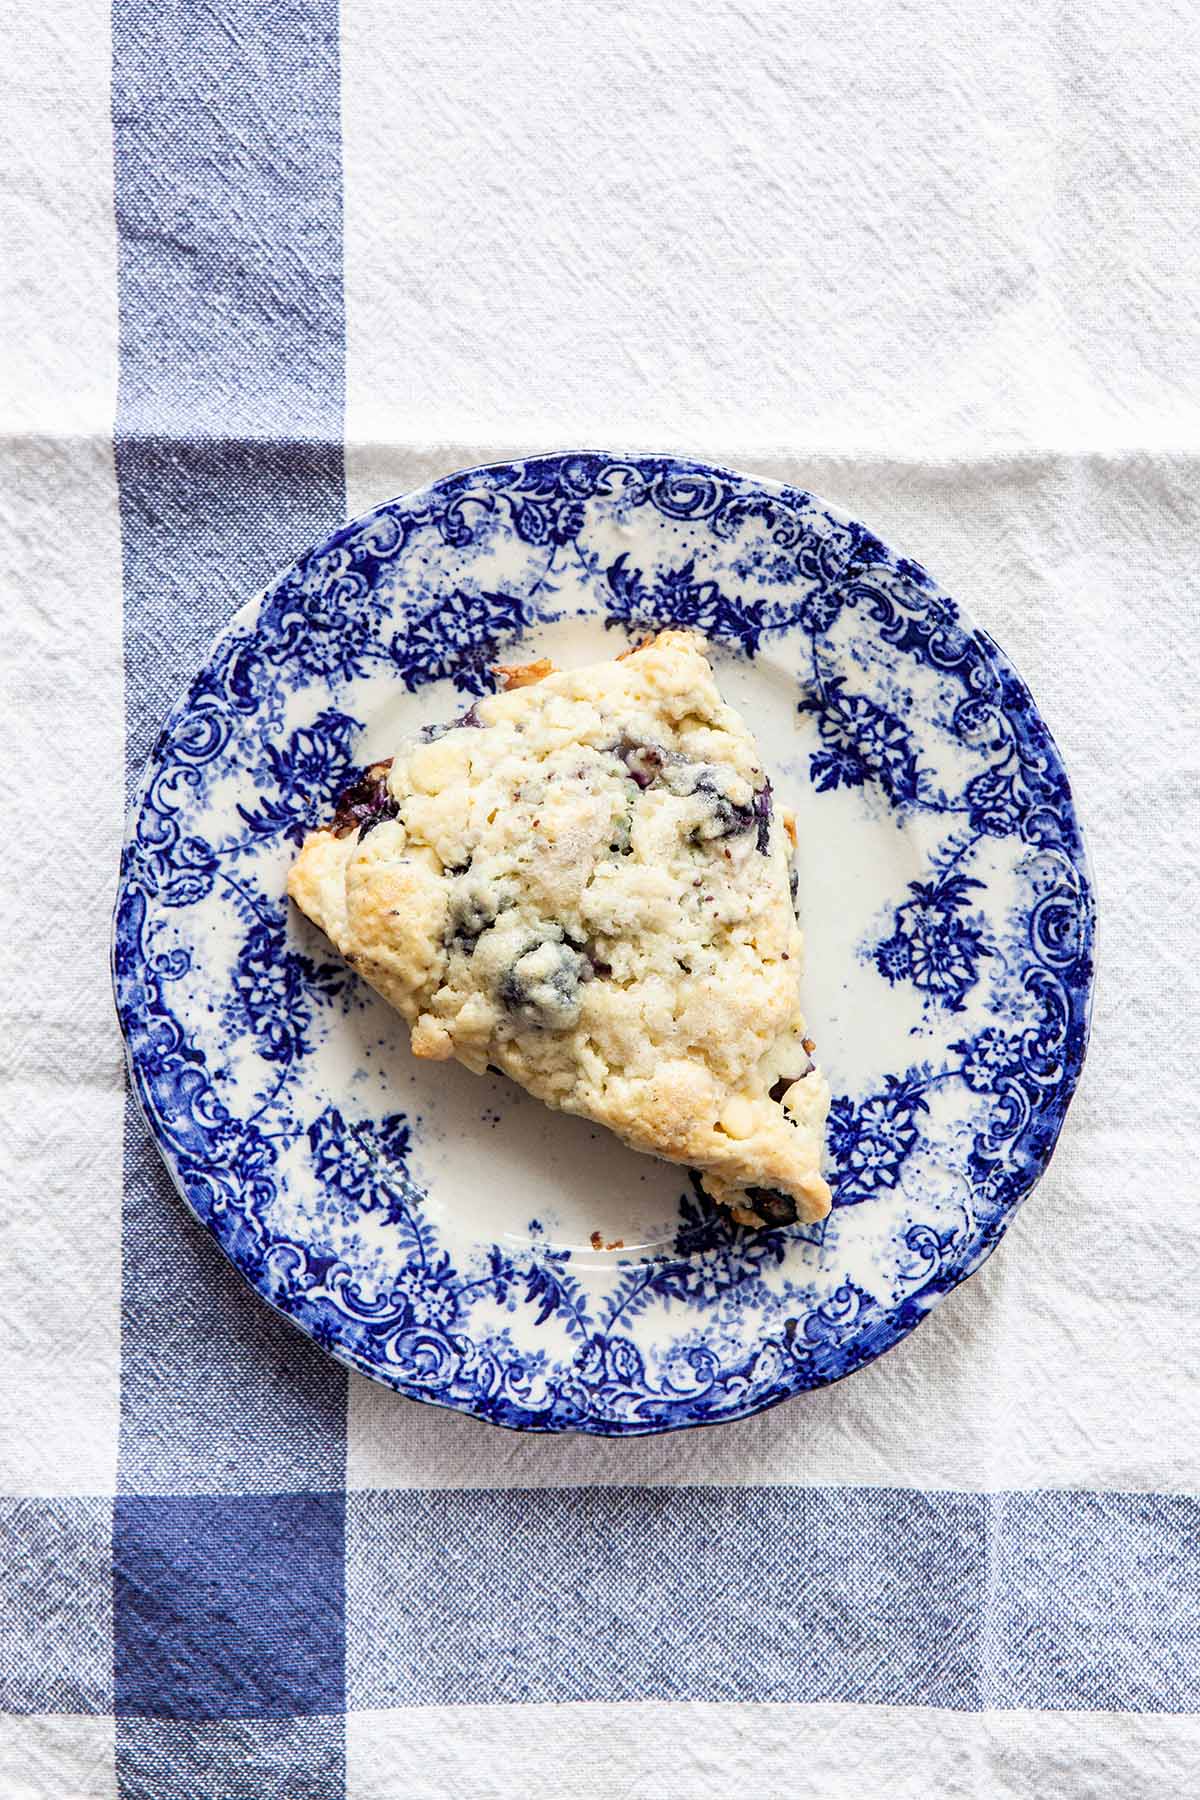 One blueberry white chocolate scone sitting on a bright blue and white plate on a white tablecloth with two blue stripes.